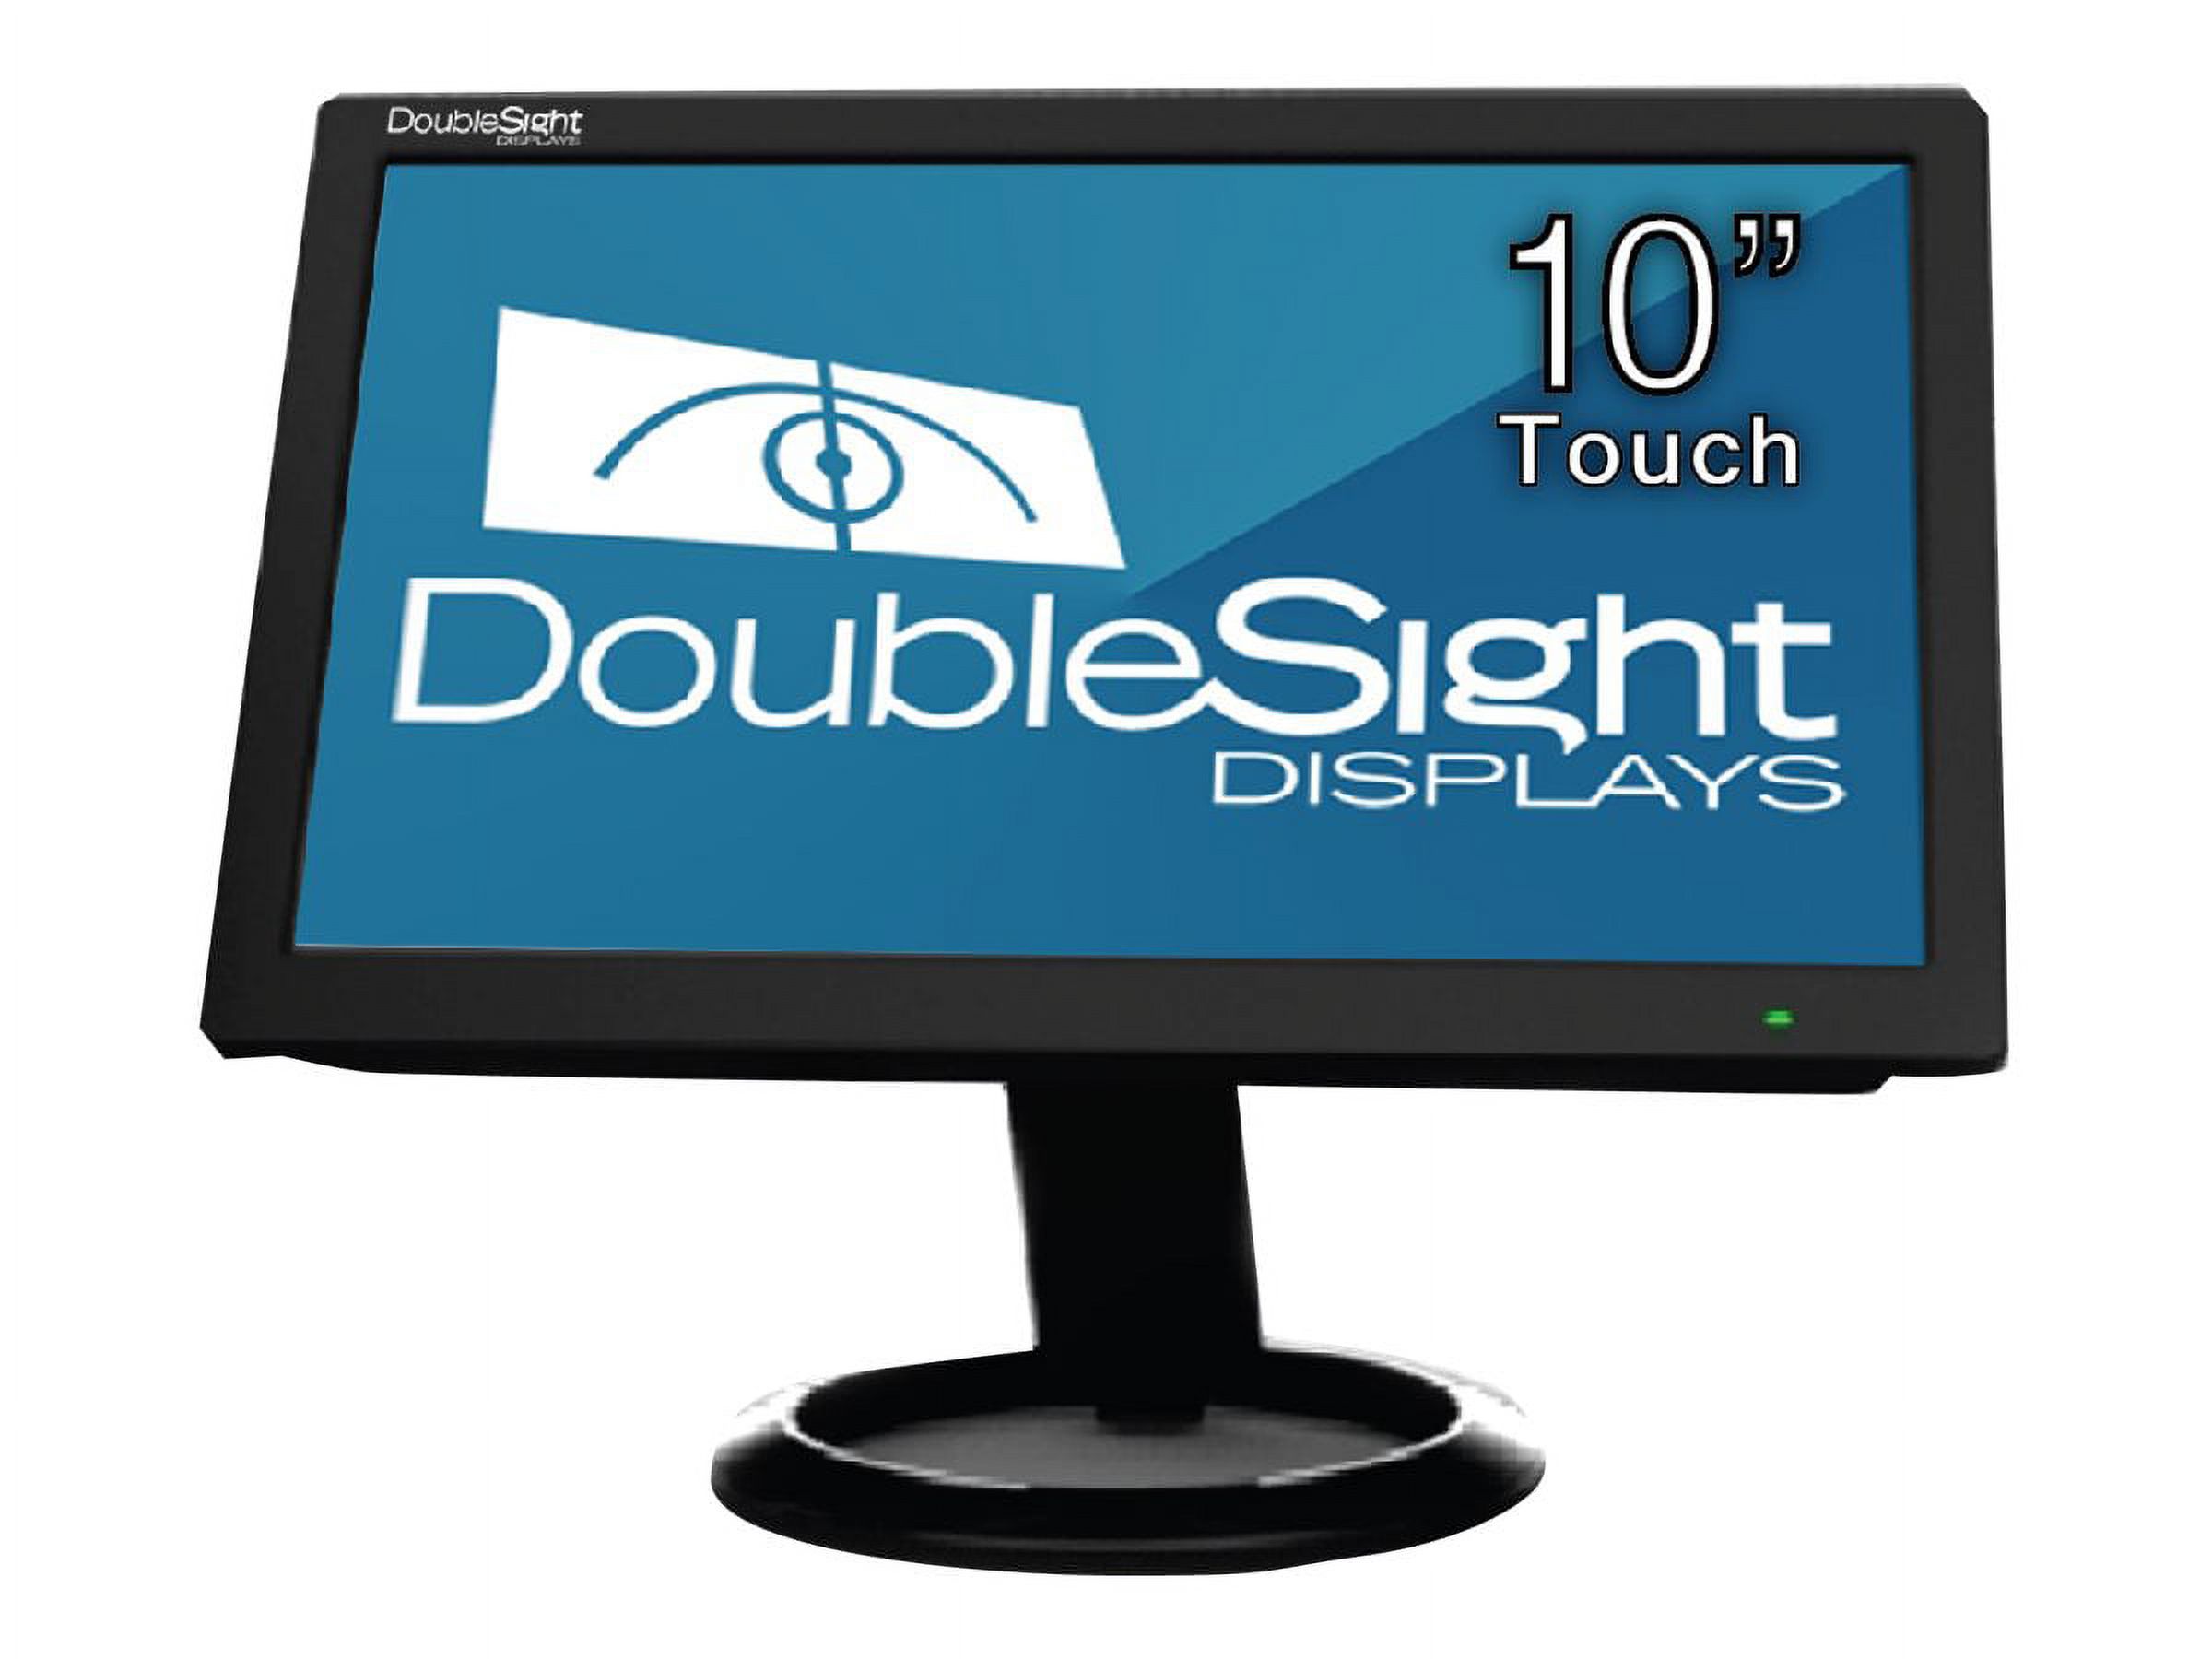 DoubleSight DS-10UT - LCD monitor - 10.1" - touchscreen - 1024 x 600 - 200 cd/m������ - 500:1 - 16 ms - USB - black - image 1 of 2